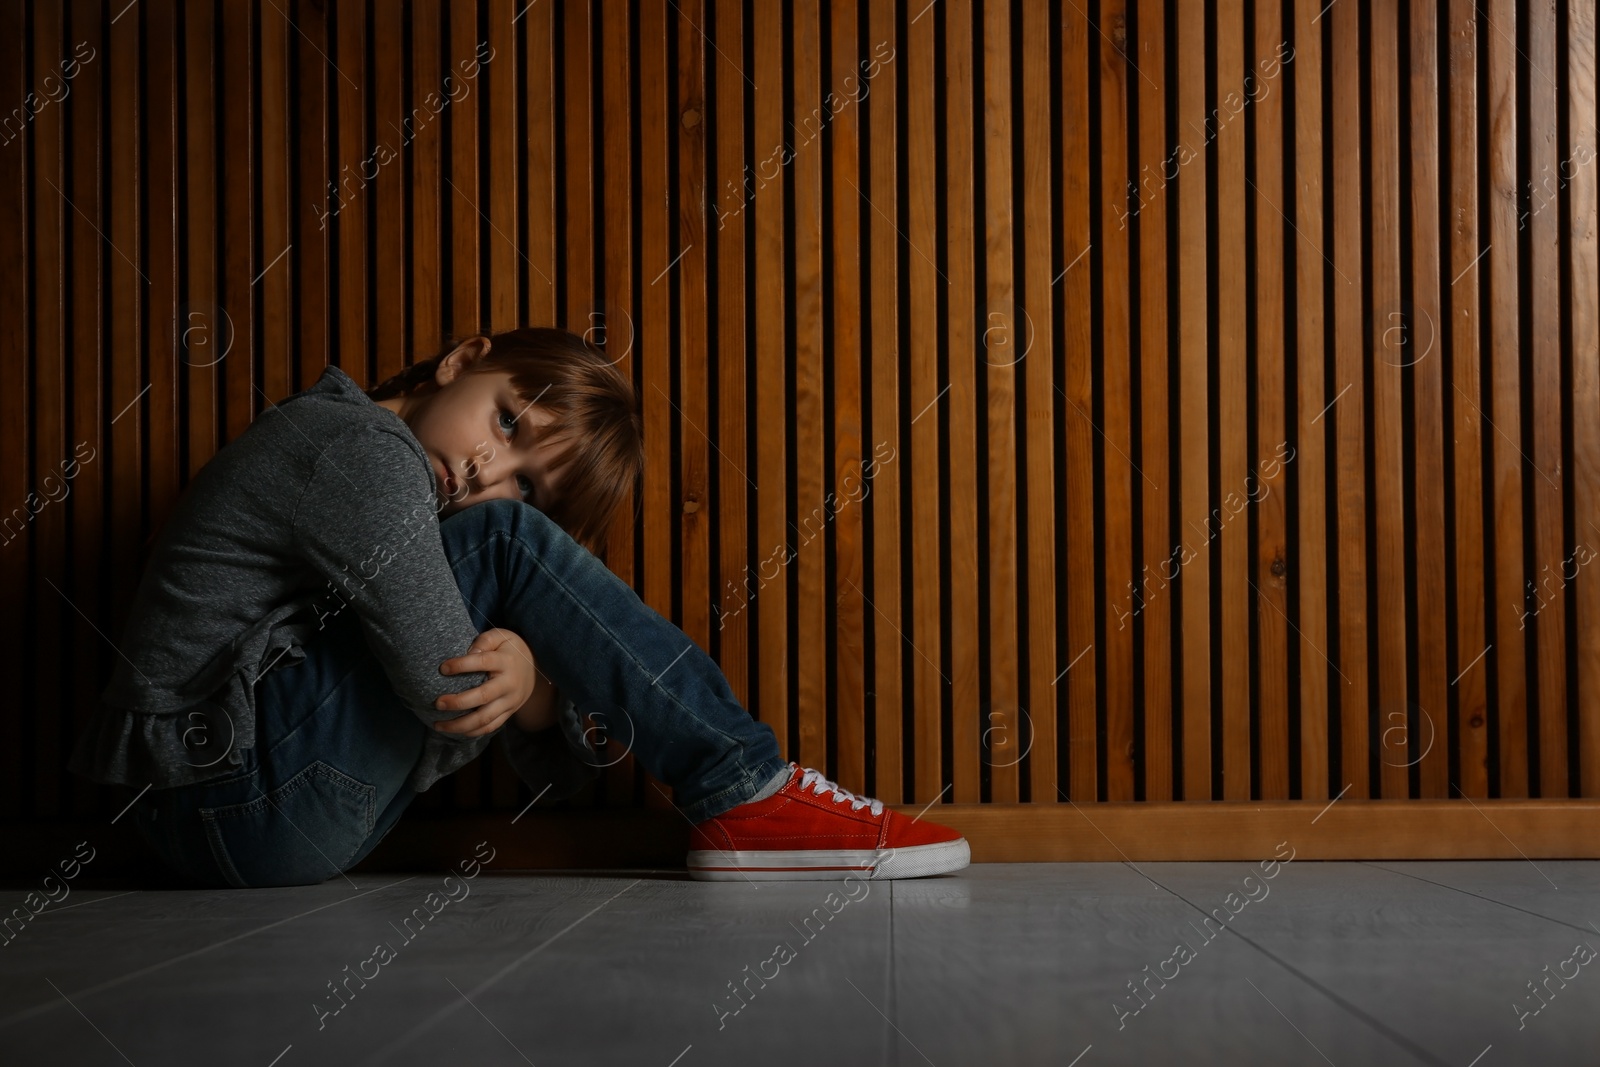 Photo of Sad little girl sitting on floor indoors, space for text. Child in danger